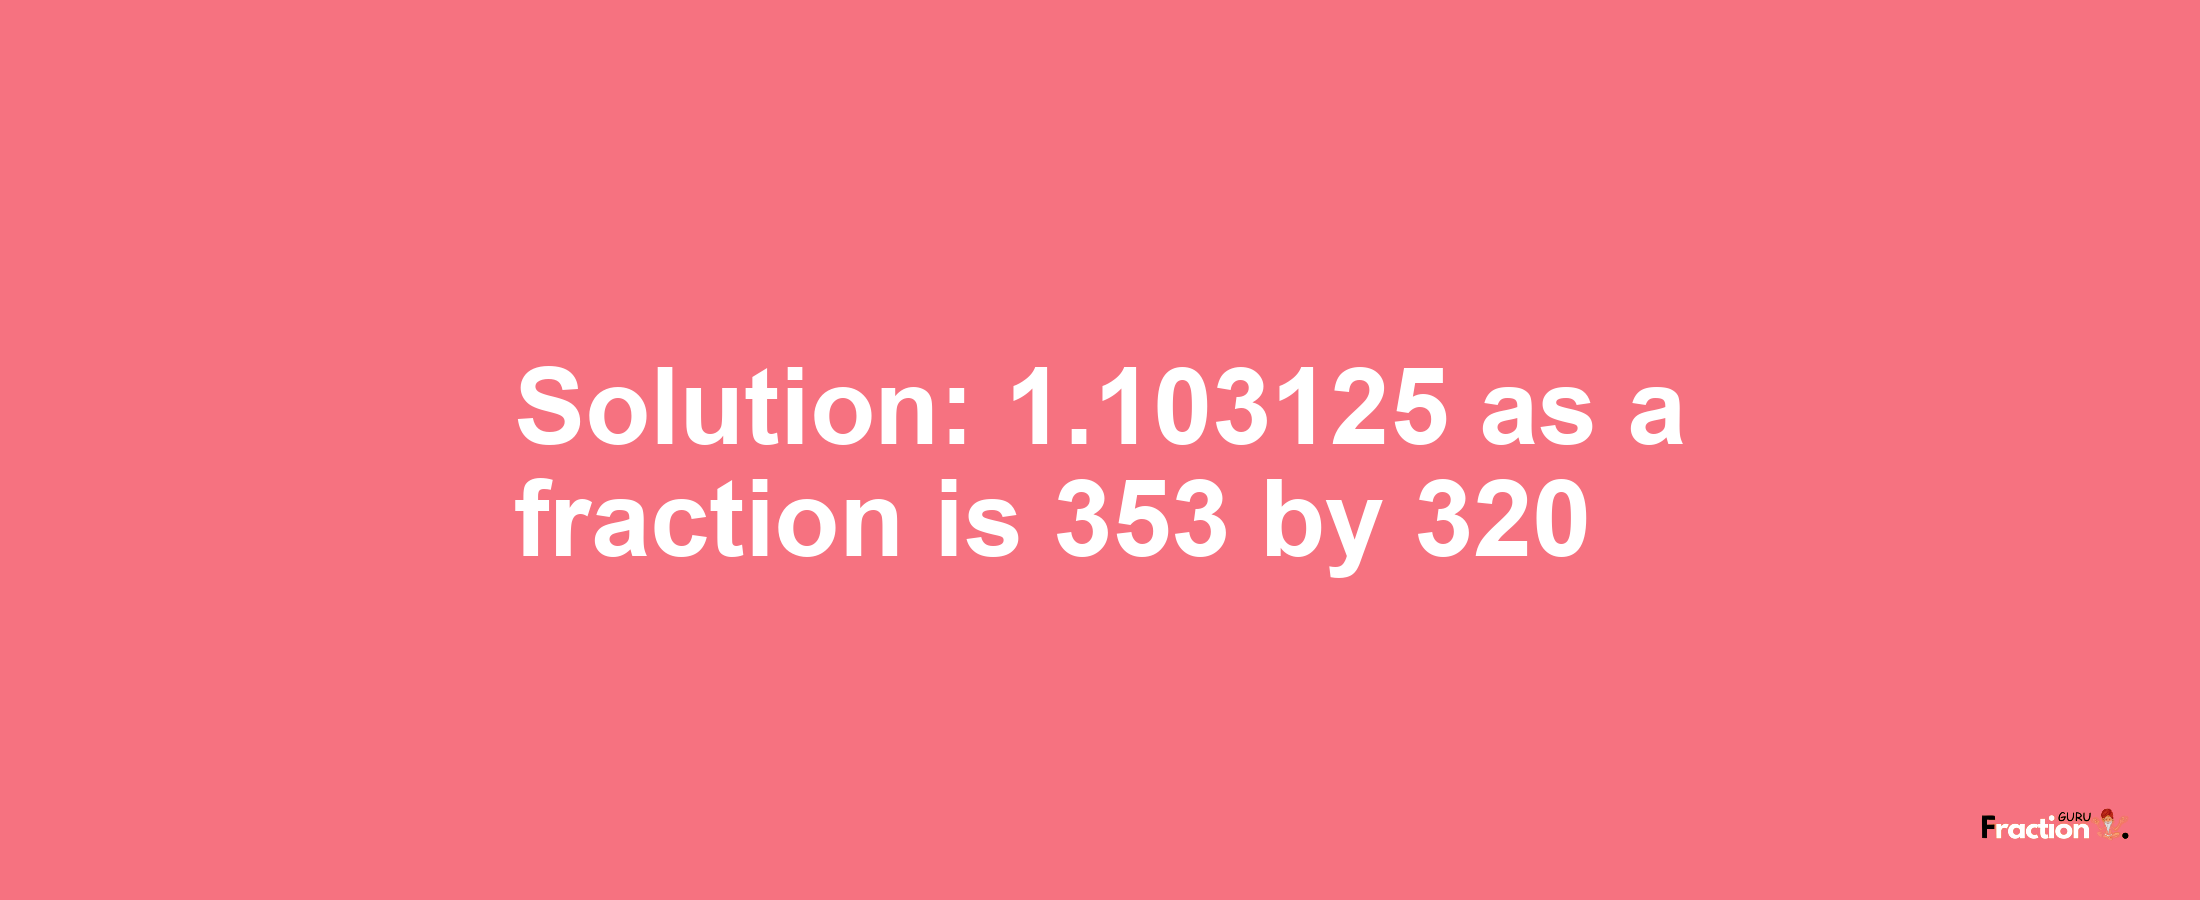 Solution:1.103125 as a fraction is 353/320